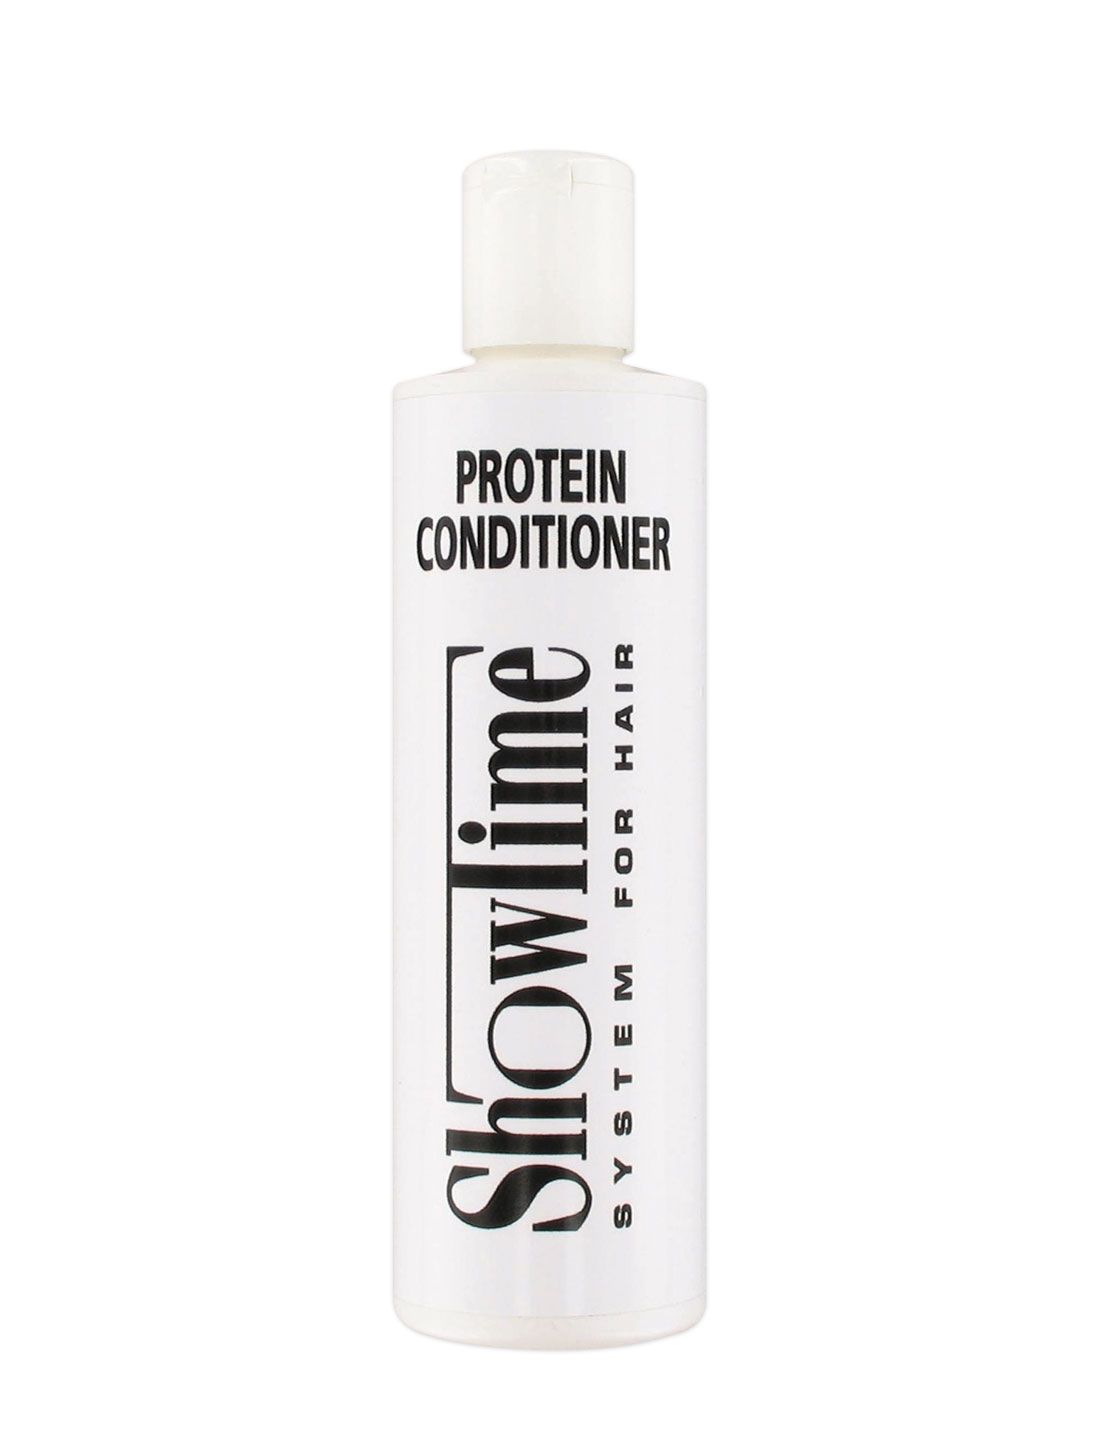 Showtime protein